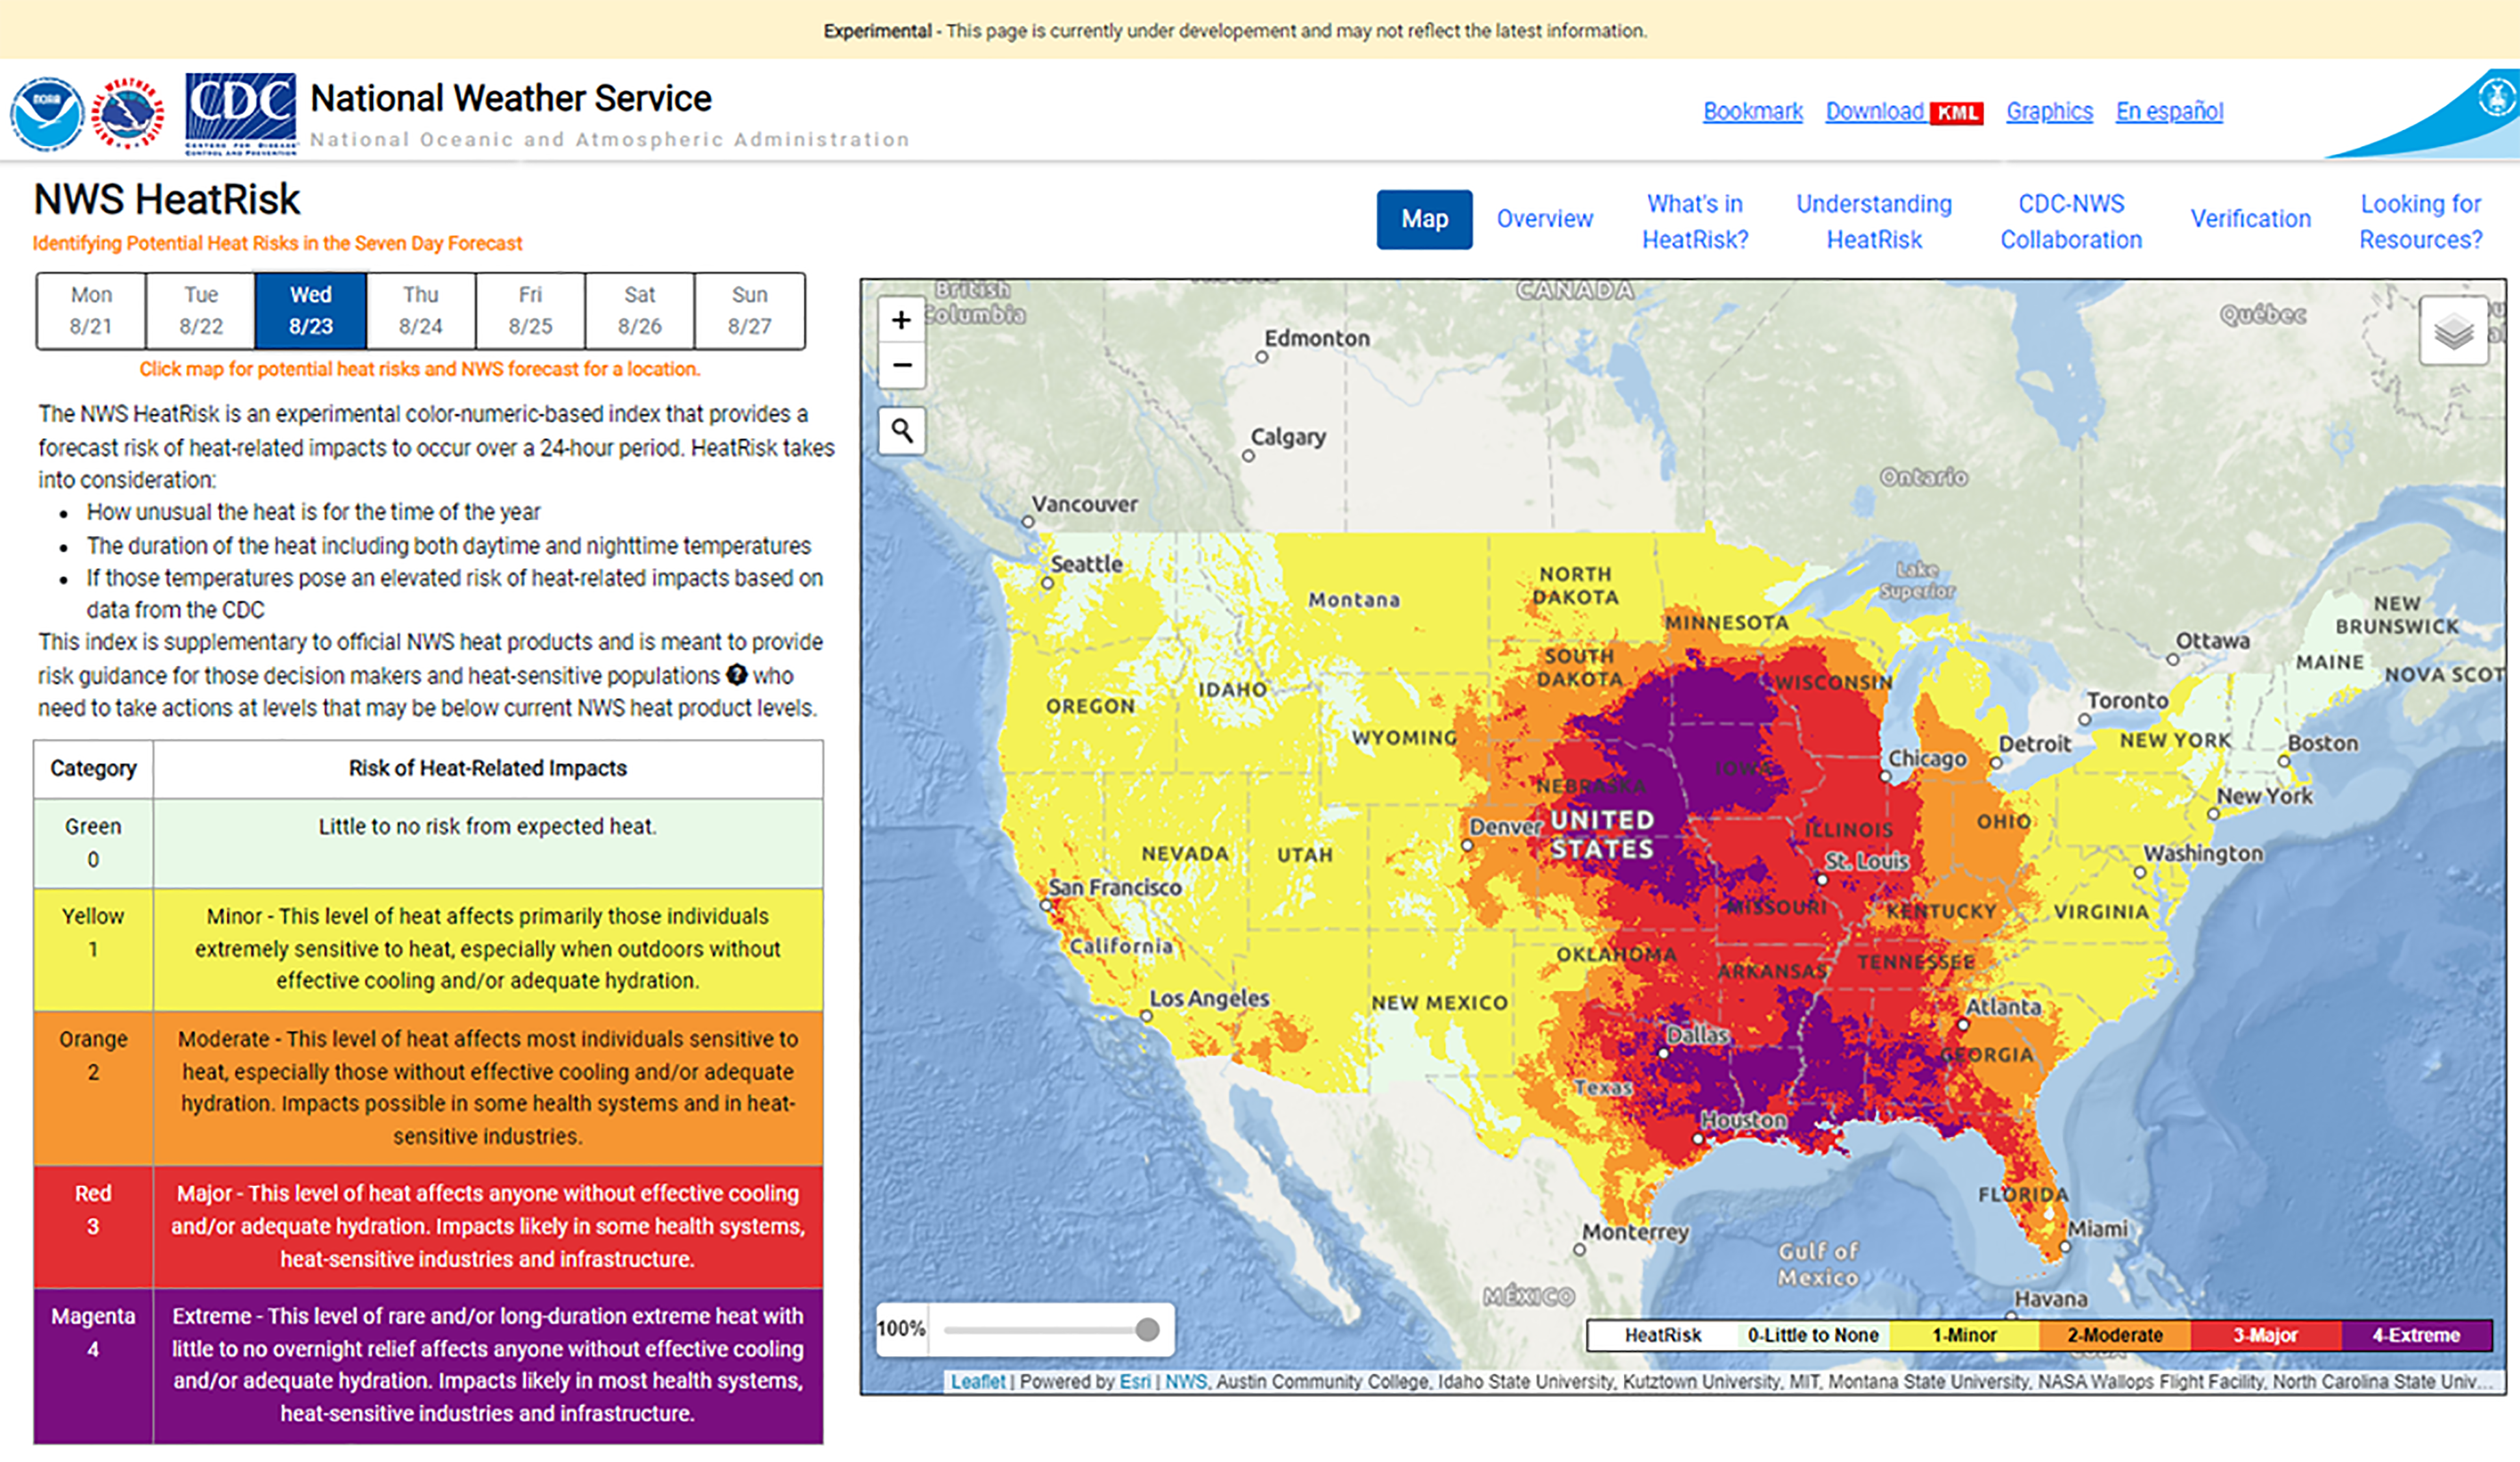 Image showing mockup of NOAA’s National Weather Service experimental HeatRisk tool website for the contiguous U.S., where NWS forecasts are combined with CDC heath-heat data to identify potentially dangerous heat.